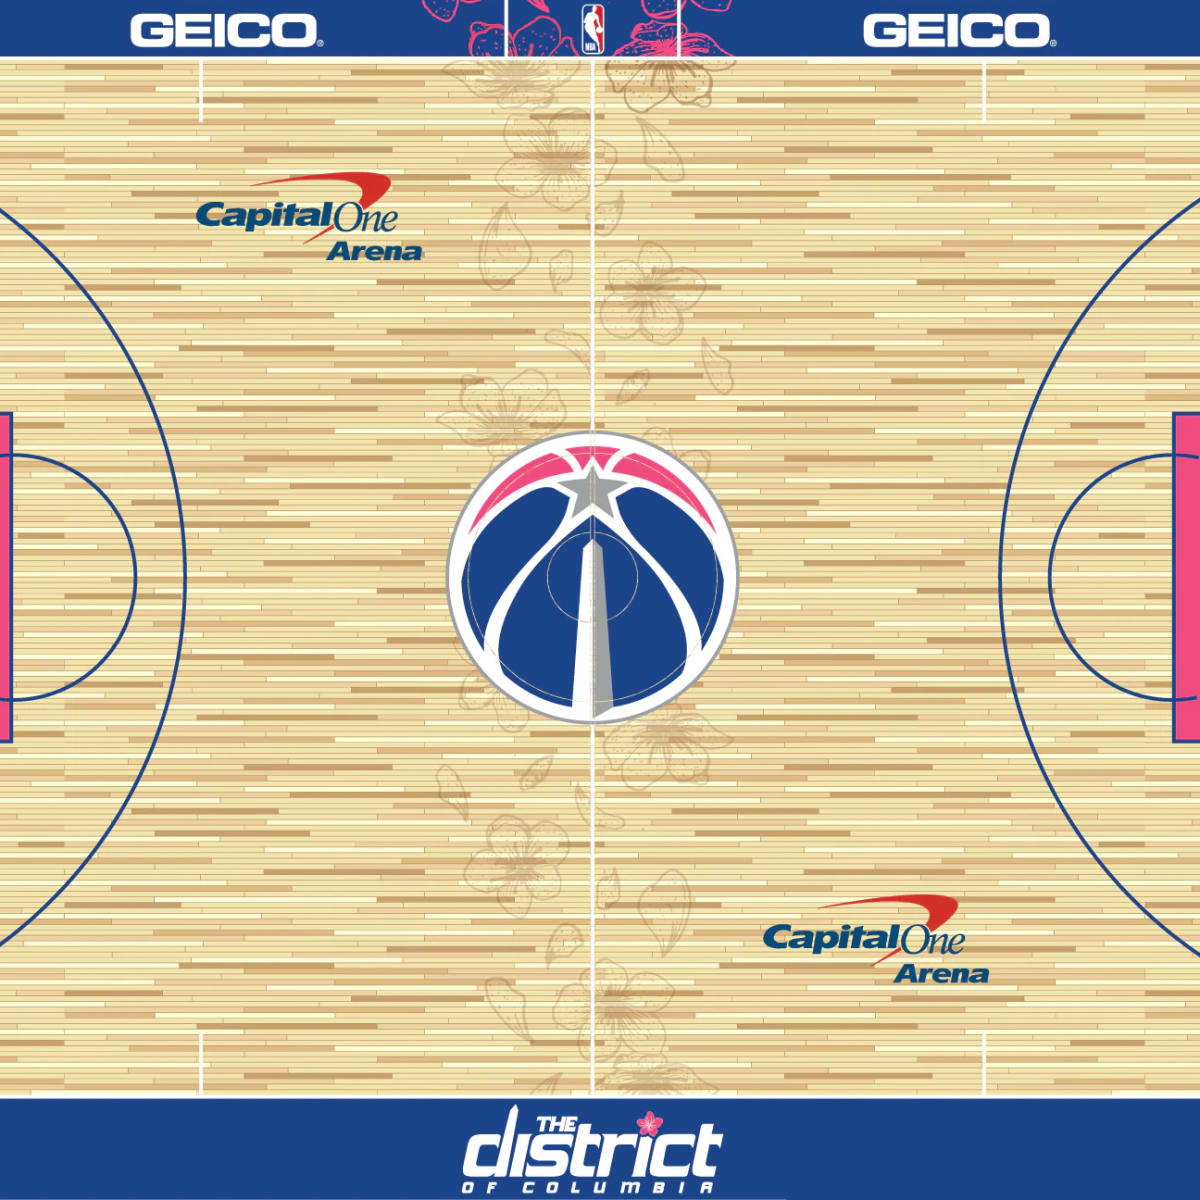 Wizards to Debut Cherry Blossom Themed Court - Sports Illustrated